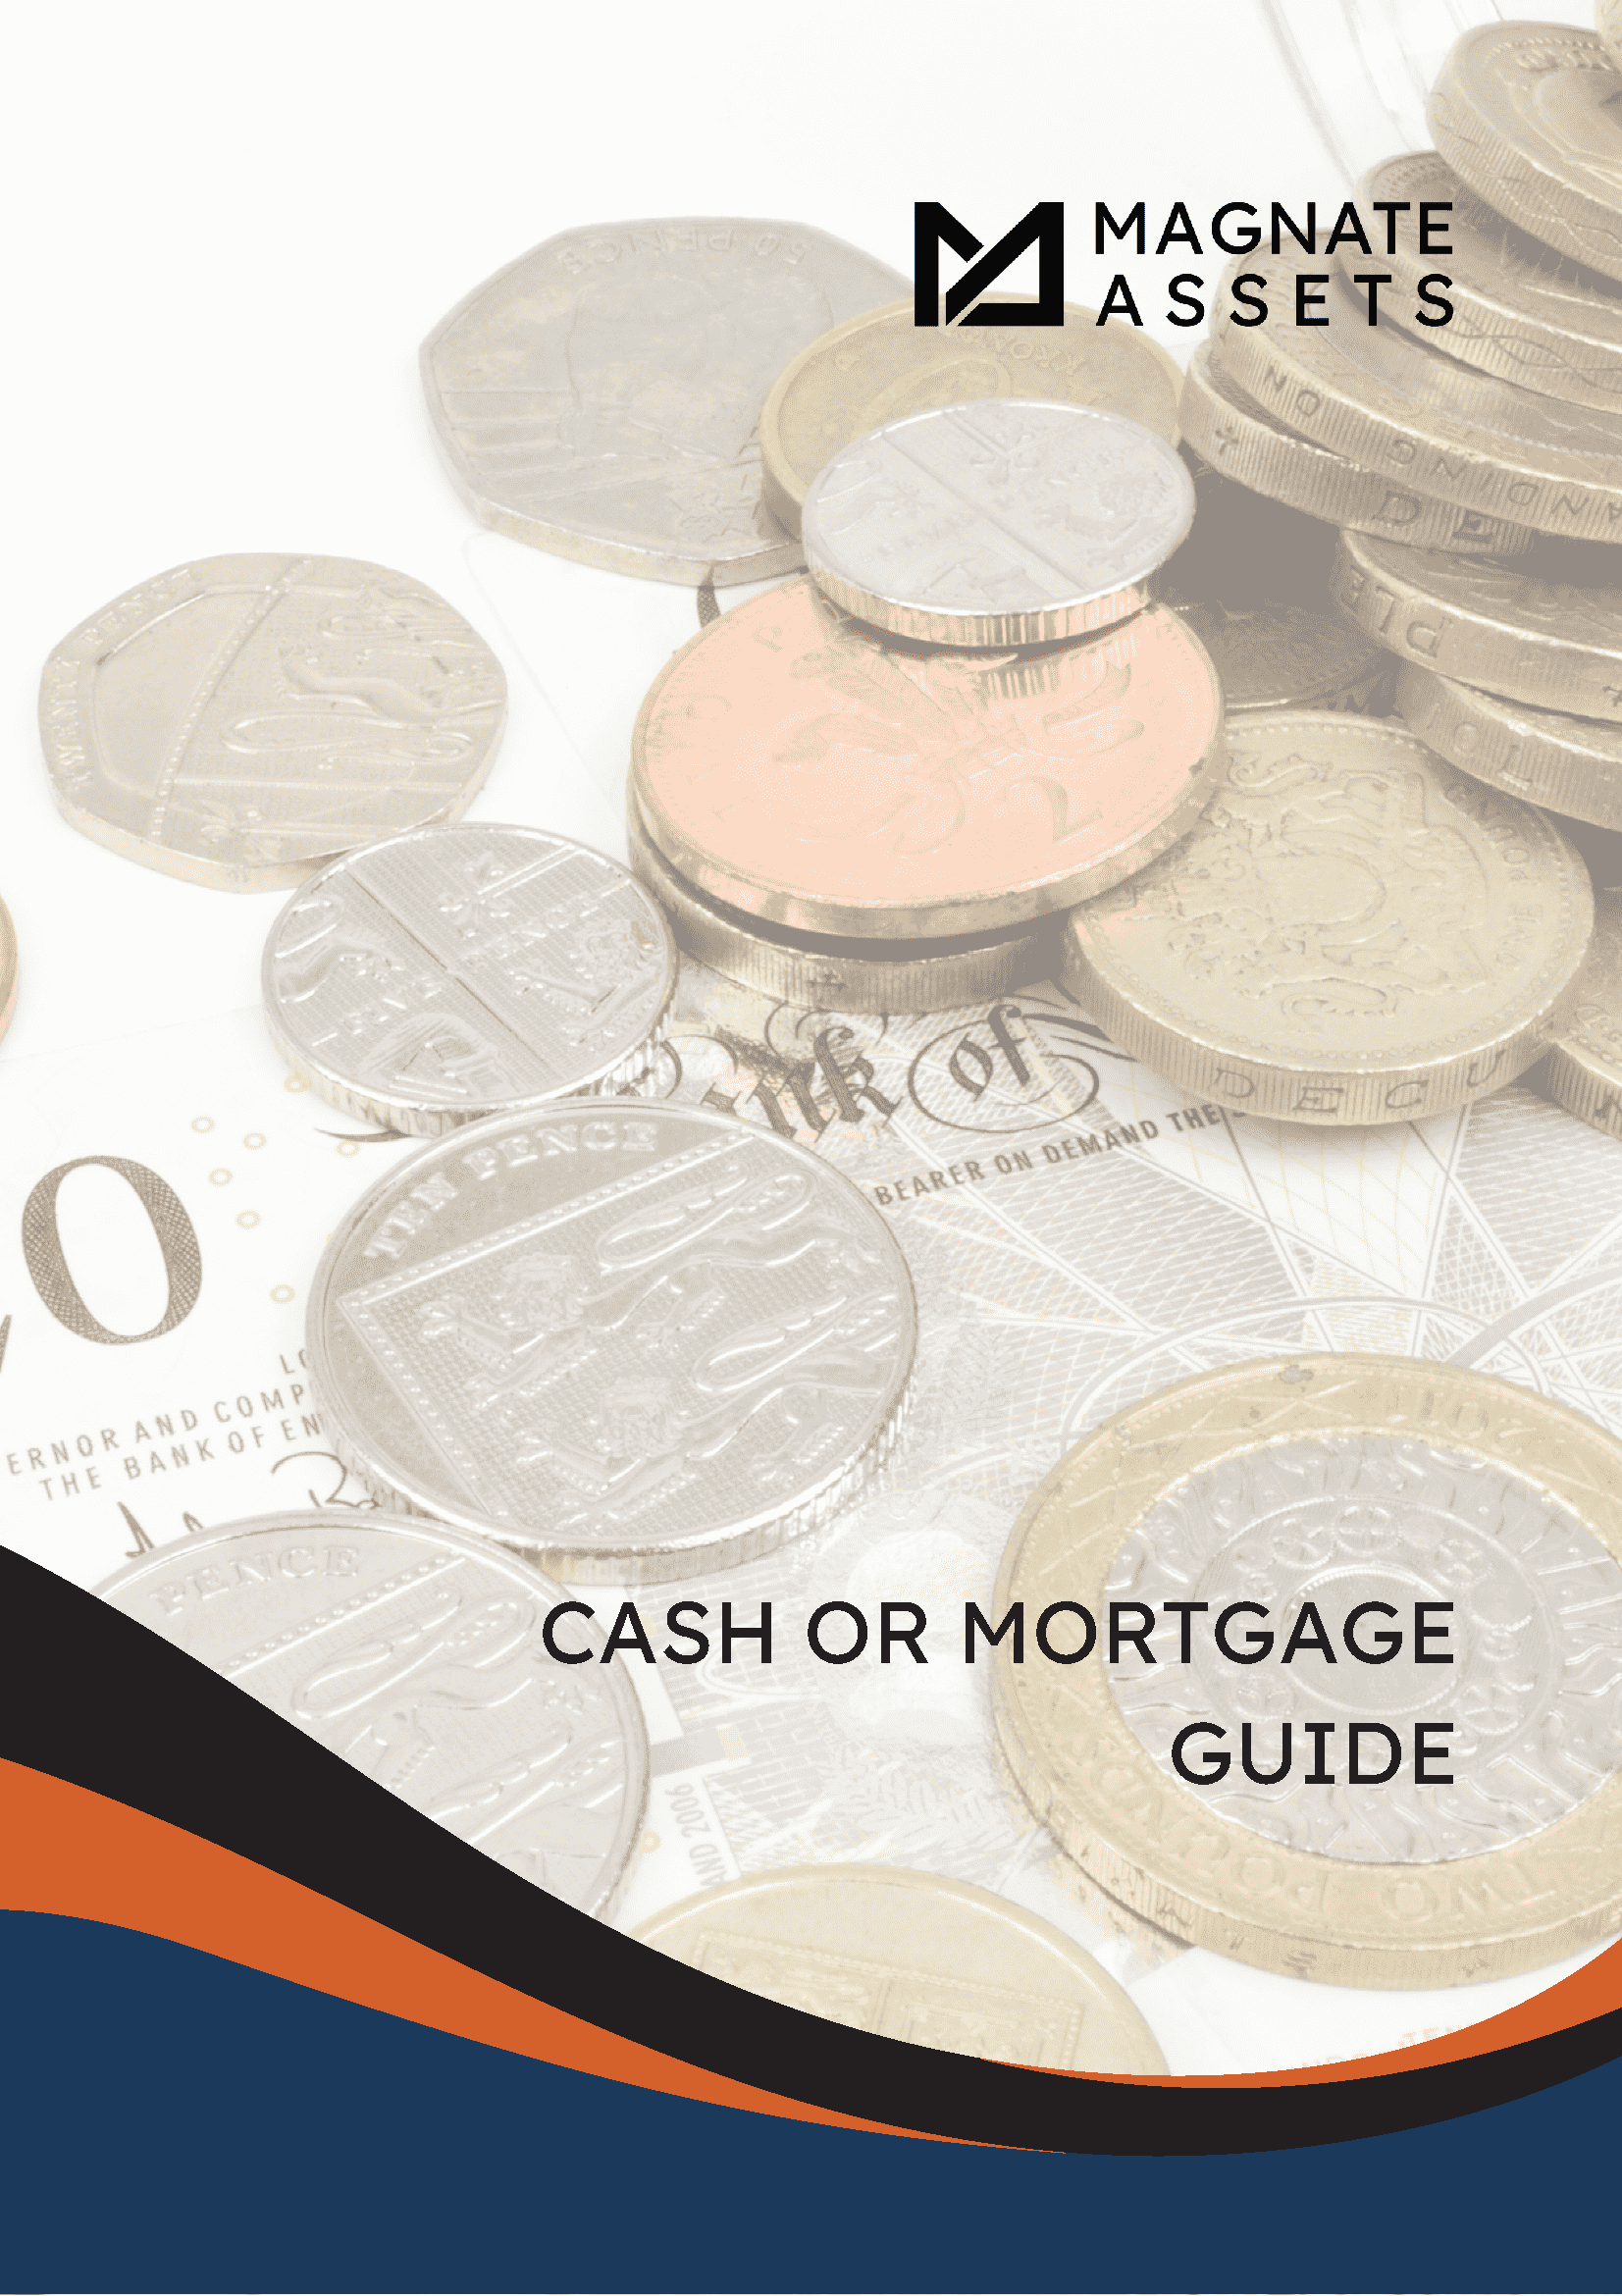 Cash or Mortgage Guide